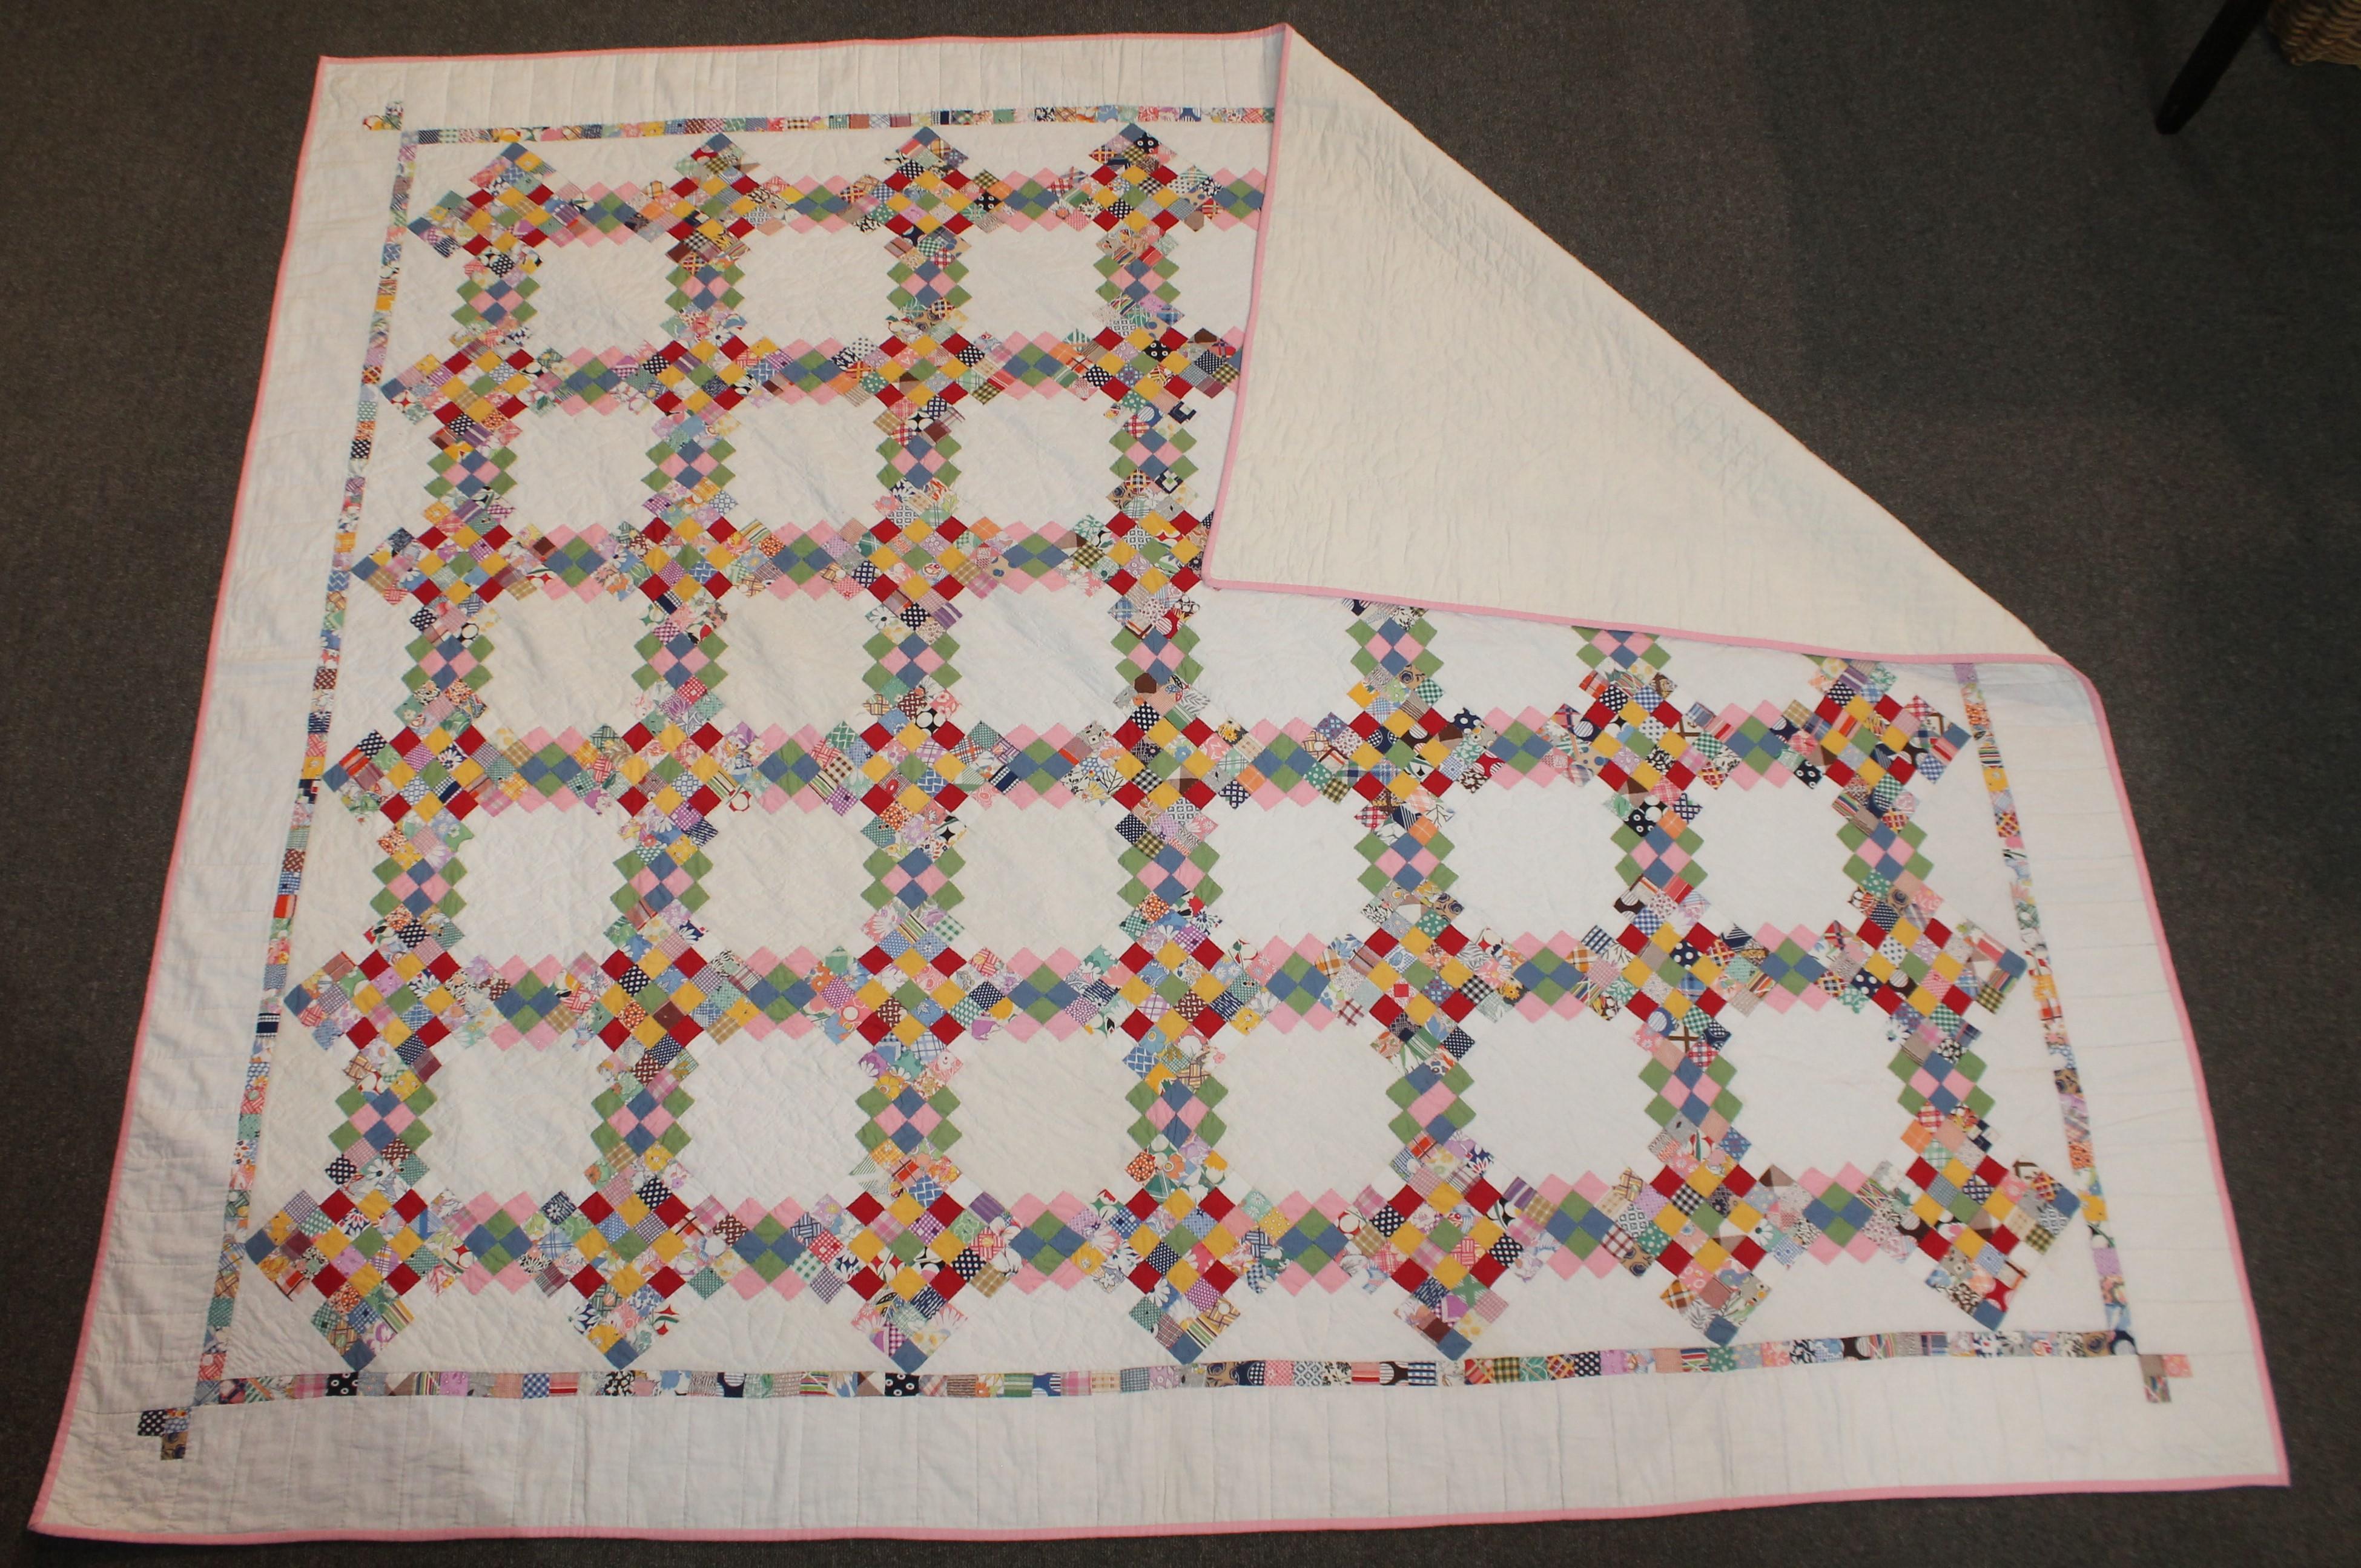 This early 20th century postage stamp triple Irish chain quilt in pristine condition. This candy striped inner border is in postage stamp formation. The condition is mint.